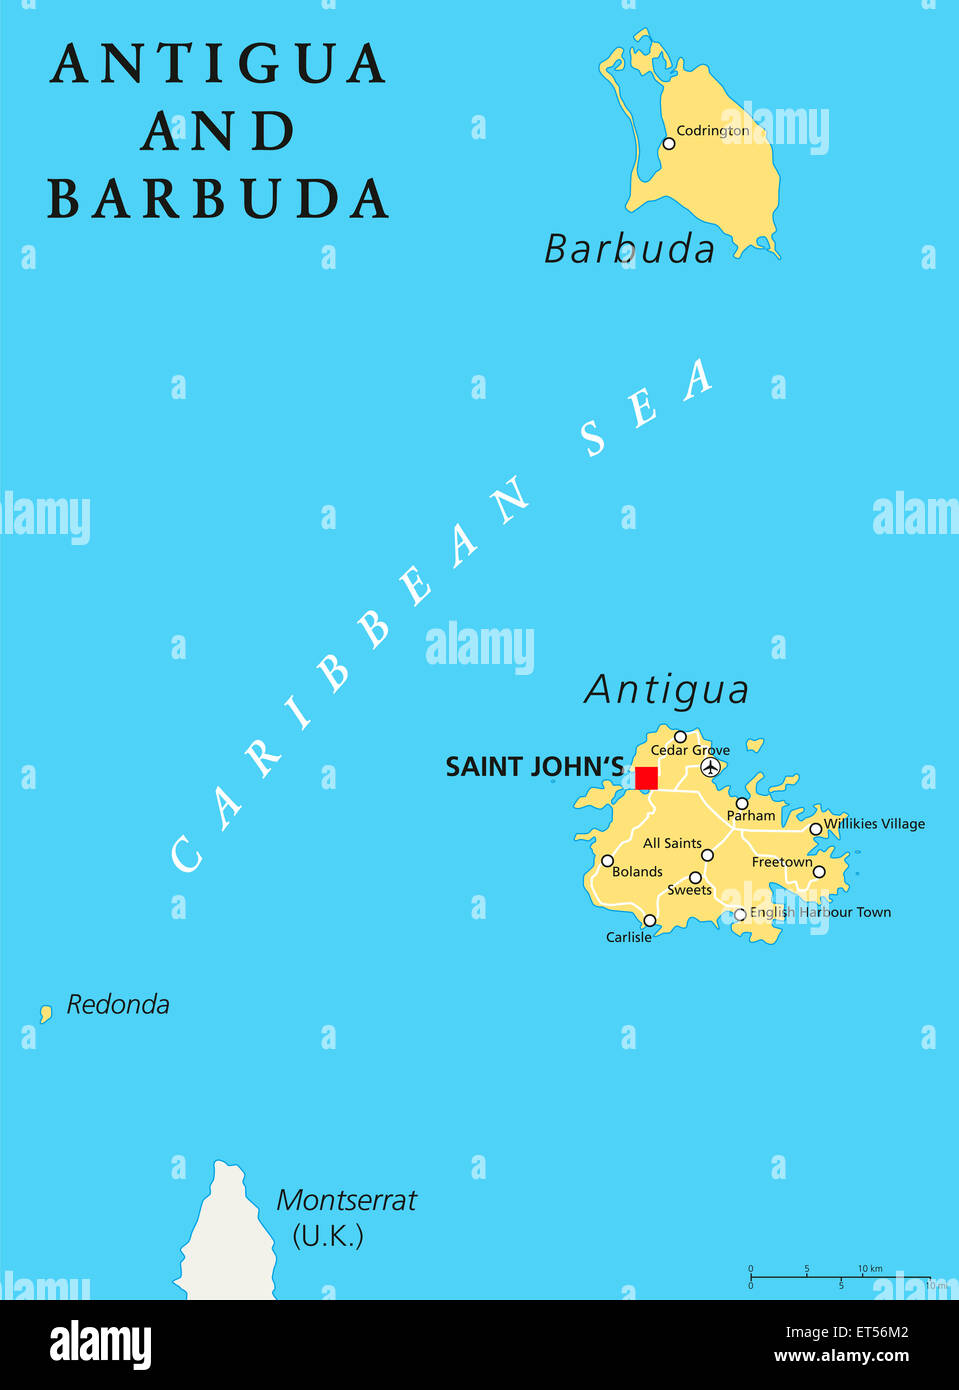 Antigua and Barbuda Political Map with capital Saint Johns and important places. English labeling and scaling. Illustration. Stock Photo